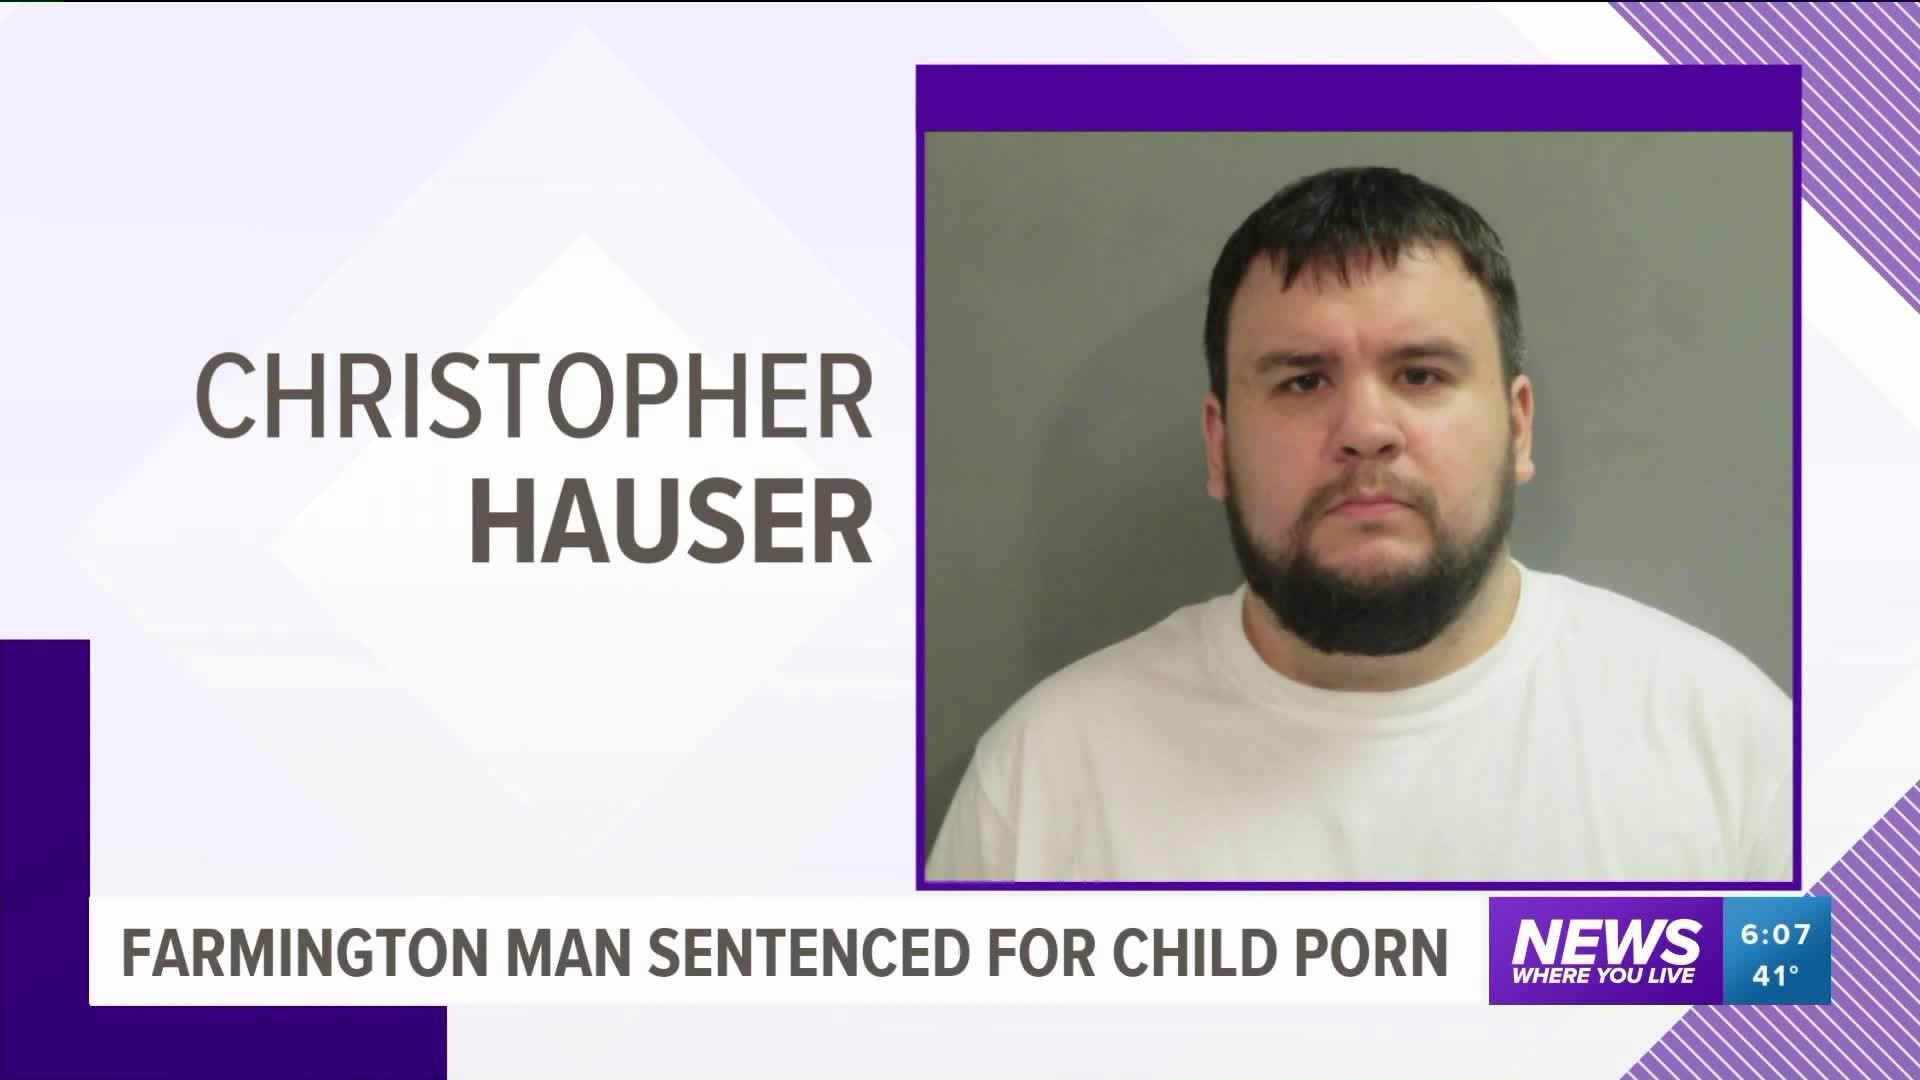 Farmington Man Sentenced To 6 Years In Federal Prison For Child Pornography